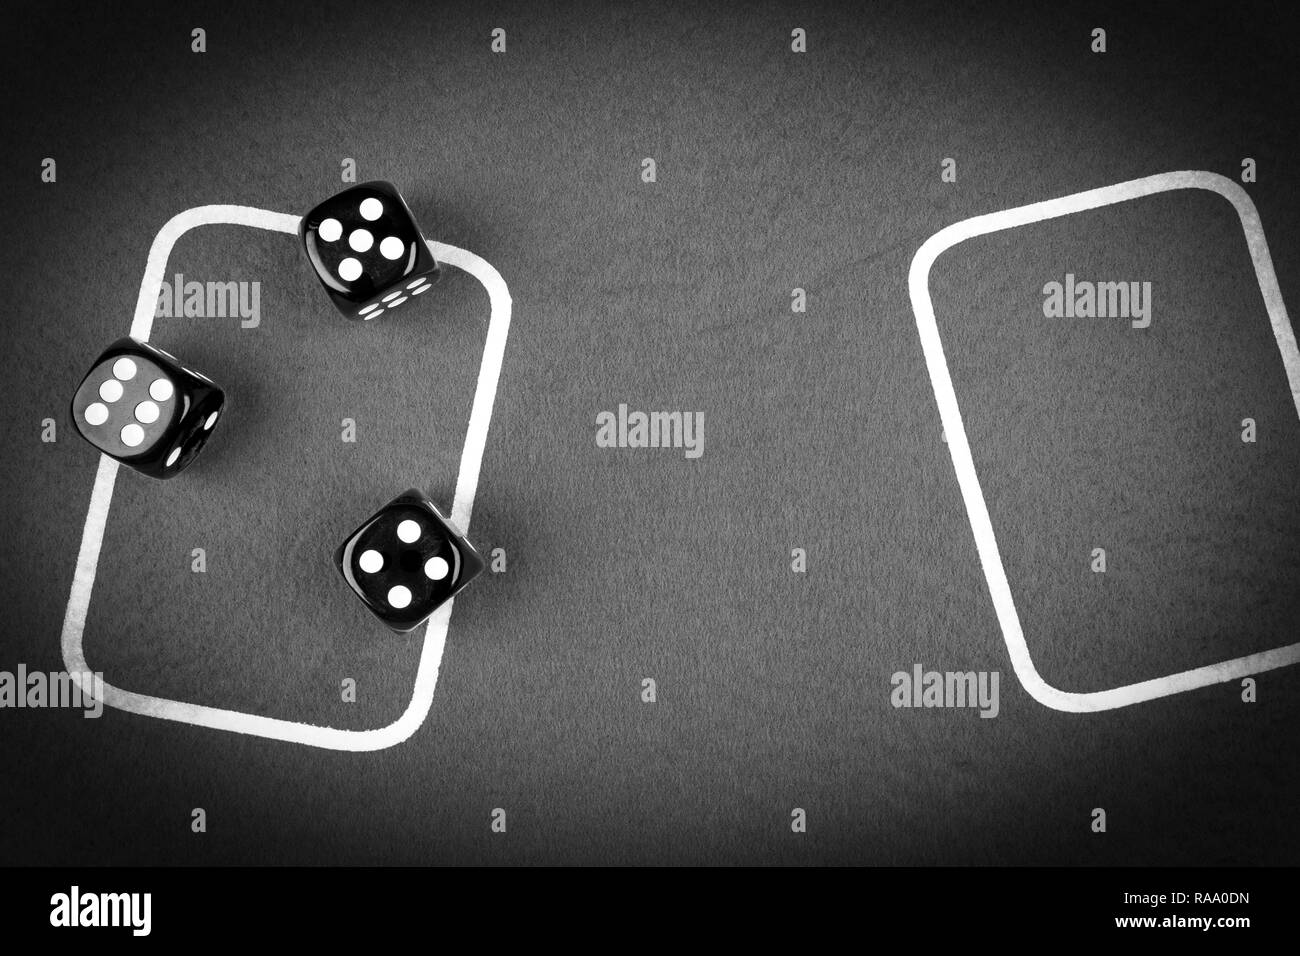 risk concept - playing dice on a green gaming table. Playing a game with dice. Red casino dice rolls. Rolling the dice concept for business risk, chan Stock Photo